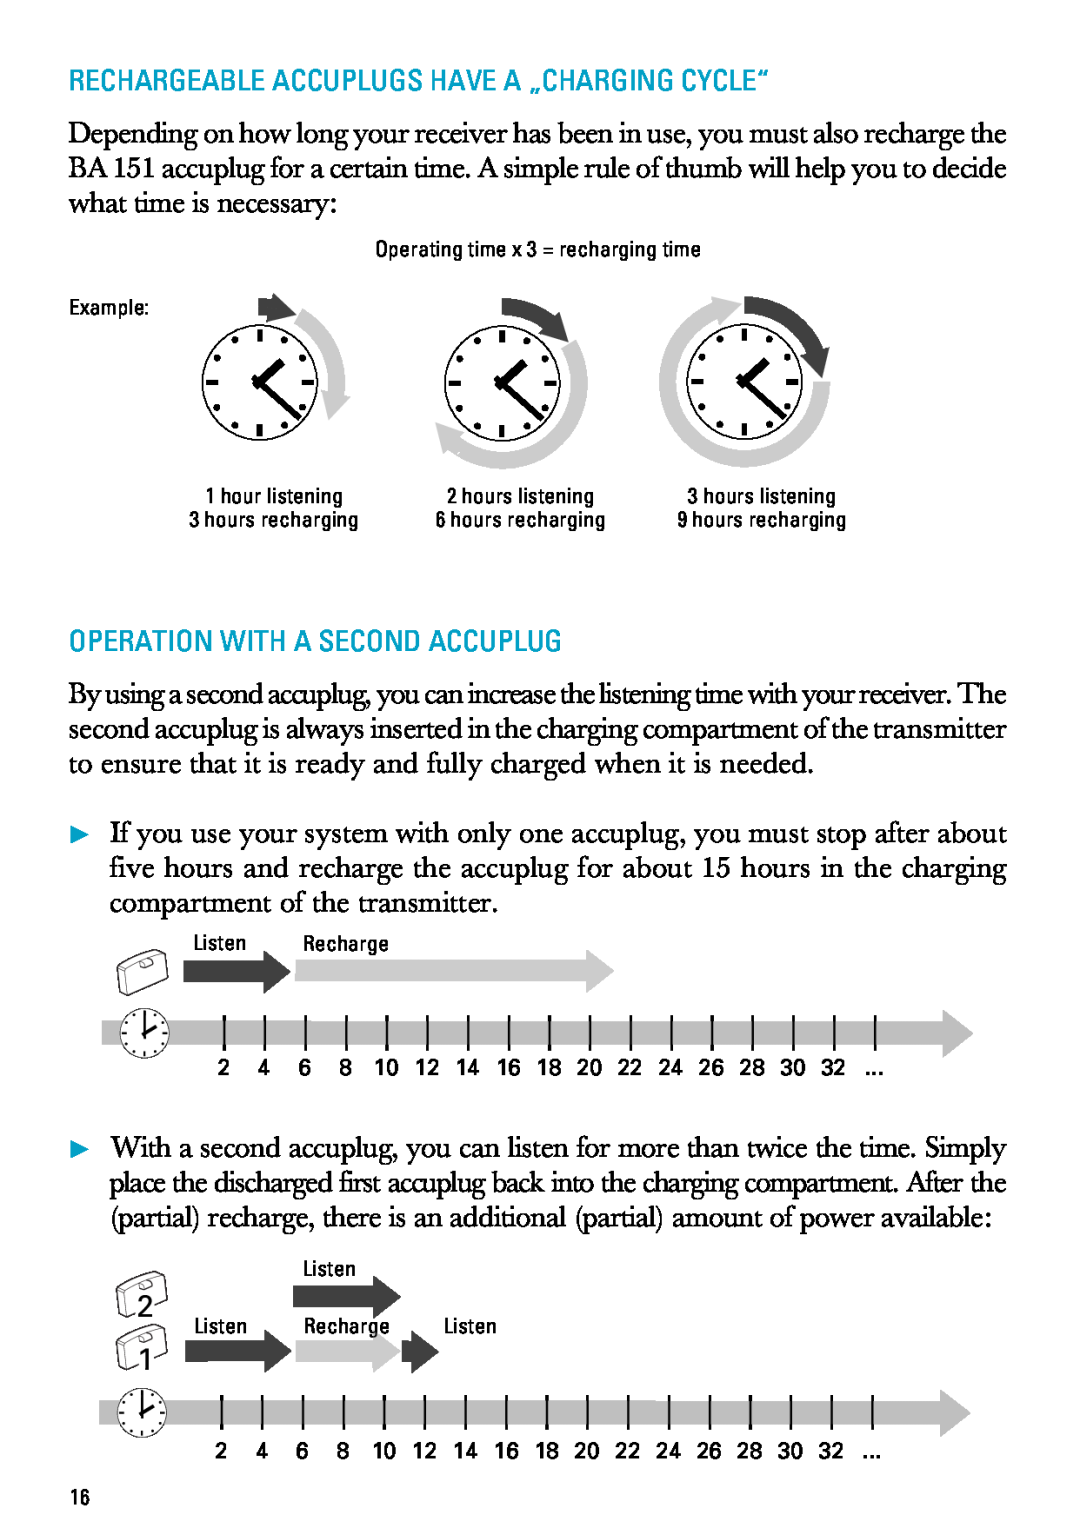 Sennheiser RI 300 manual Rechargeable Accuplugs Have A „Charging Cycle“, Operation With A Second Accuplug, Listen Recharge 